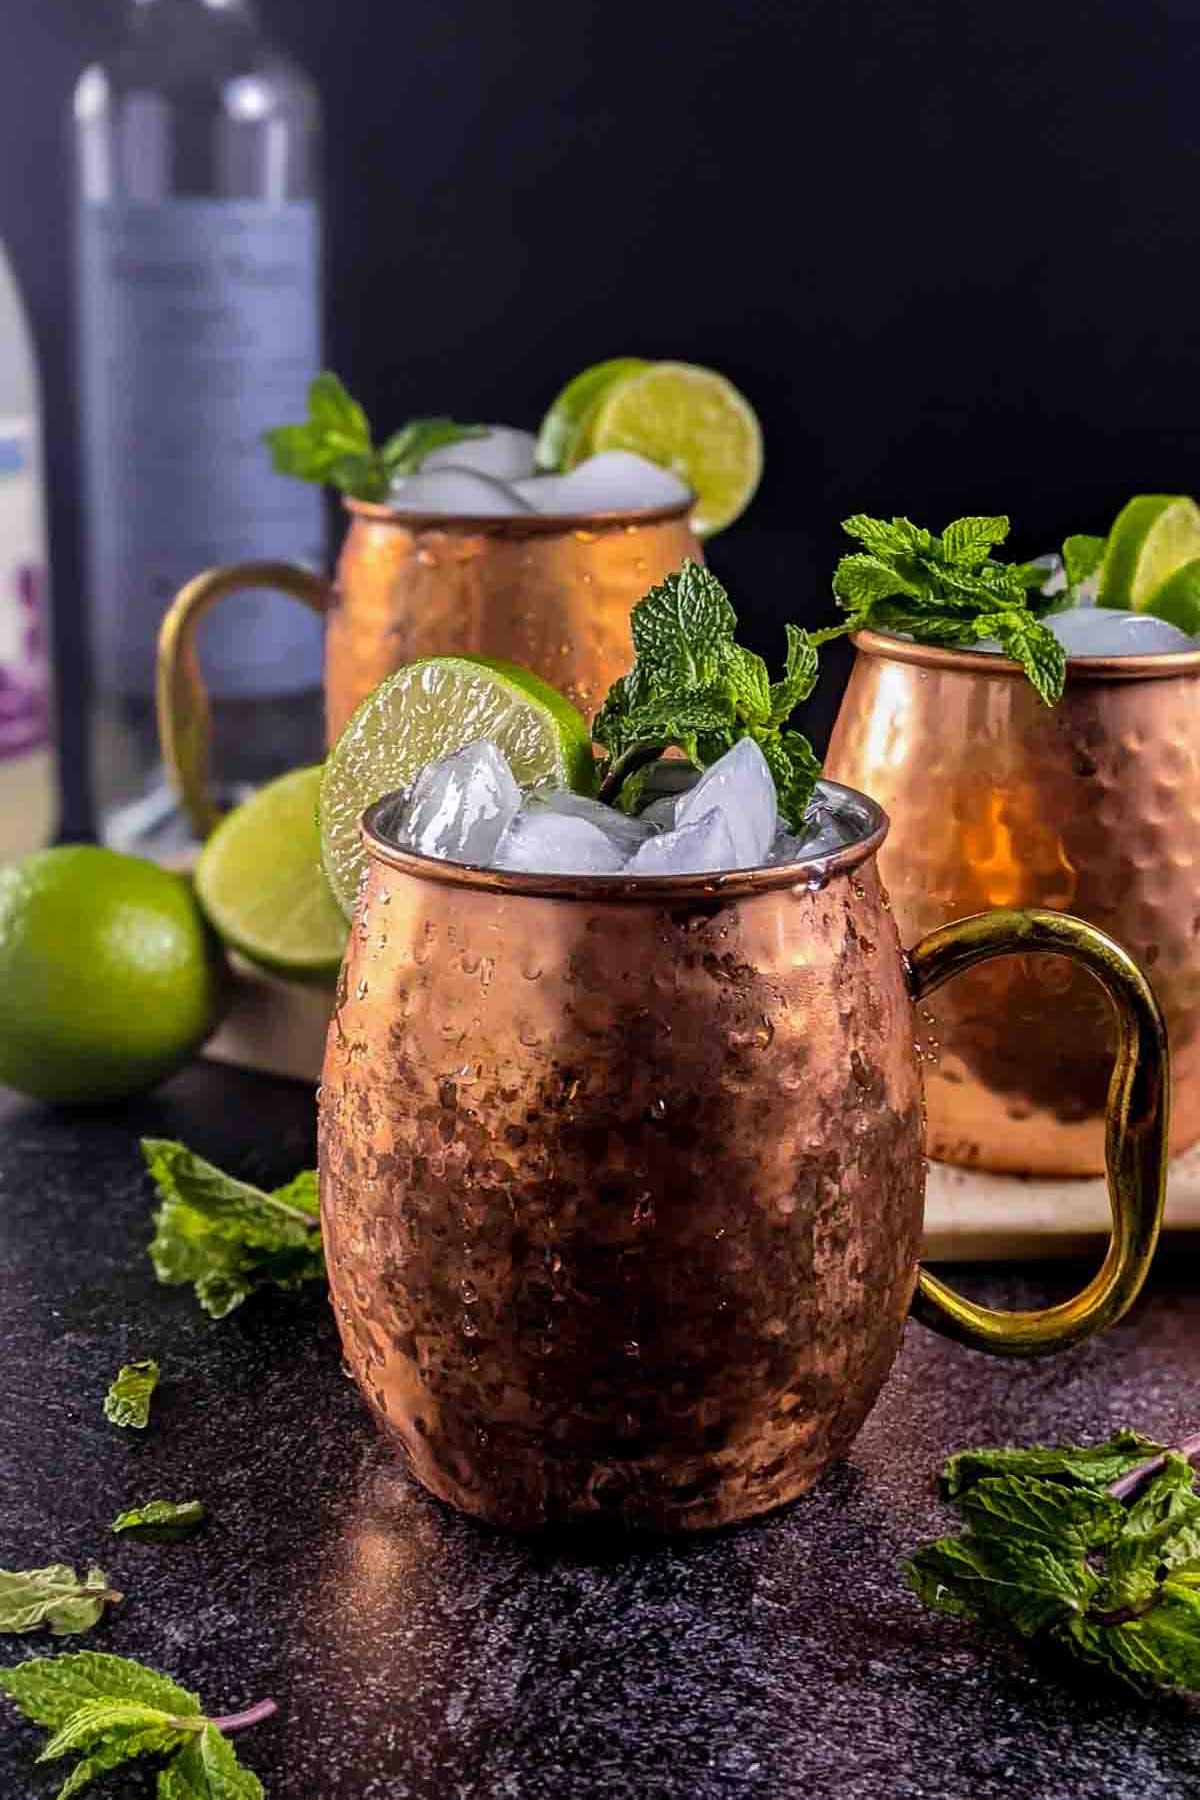 Cocktails in a copper mugs with a bottle of mezcal in the background.